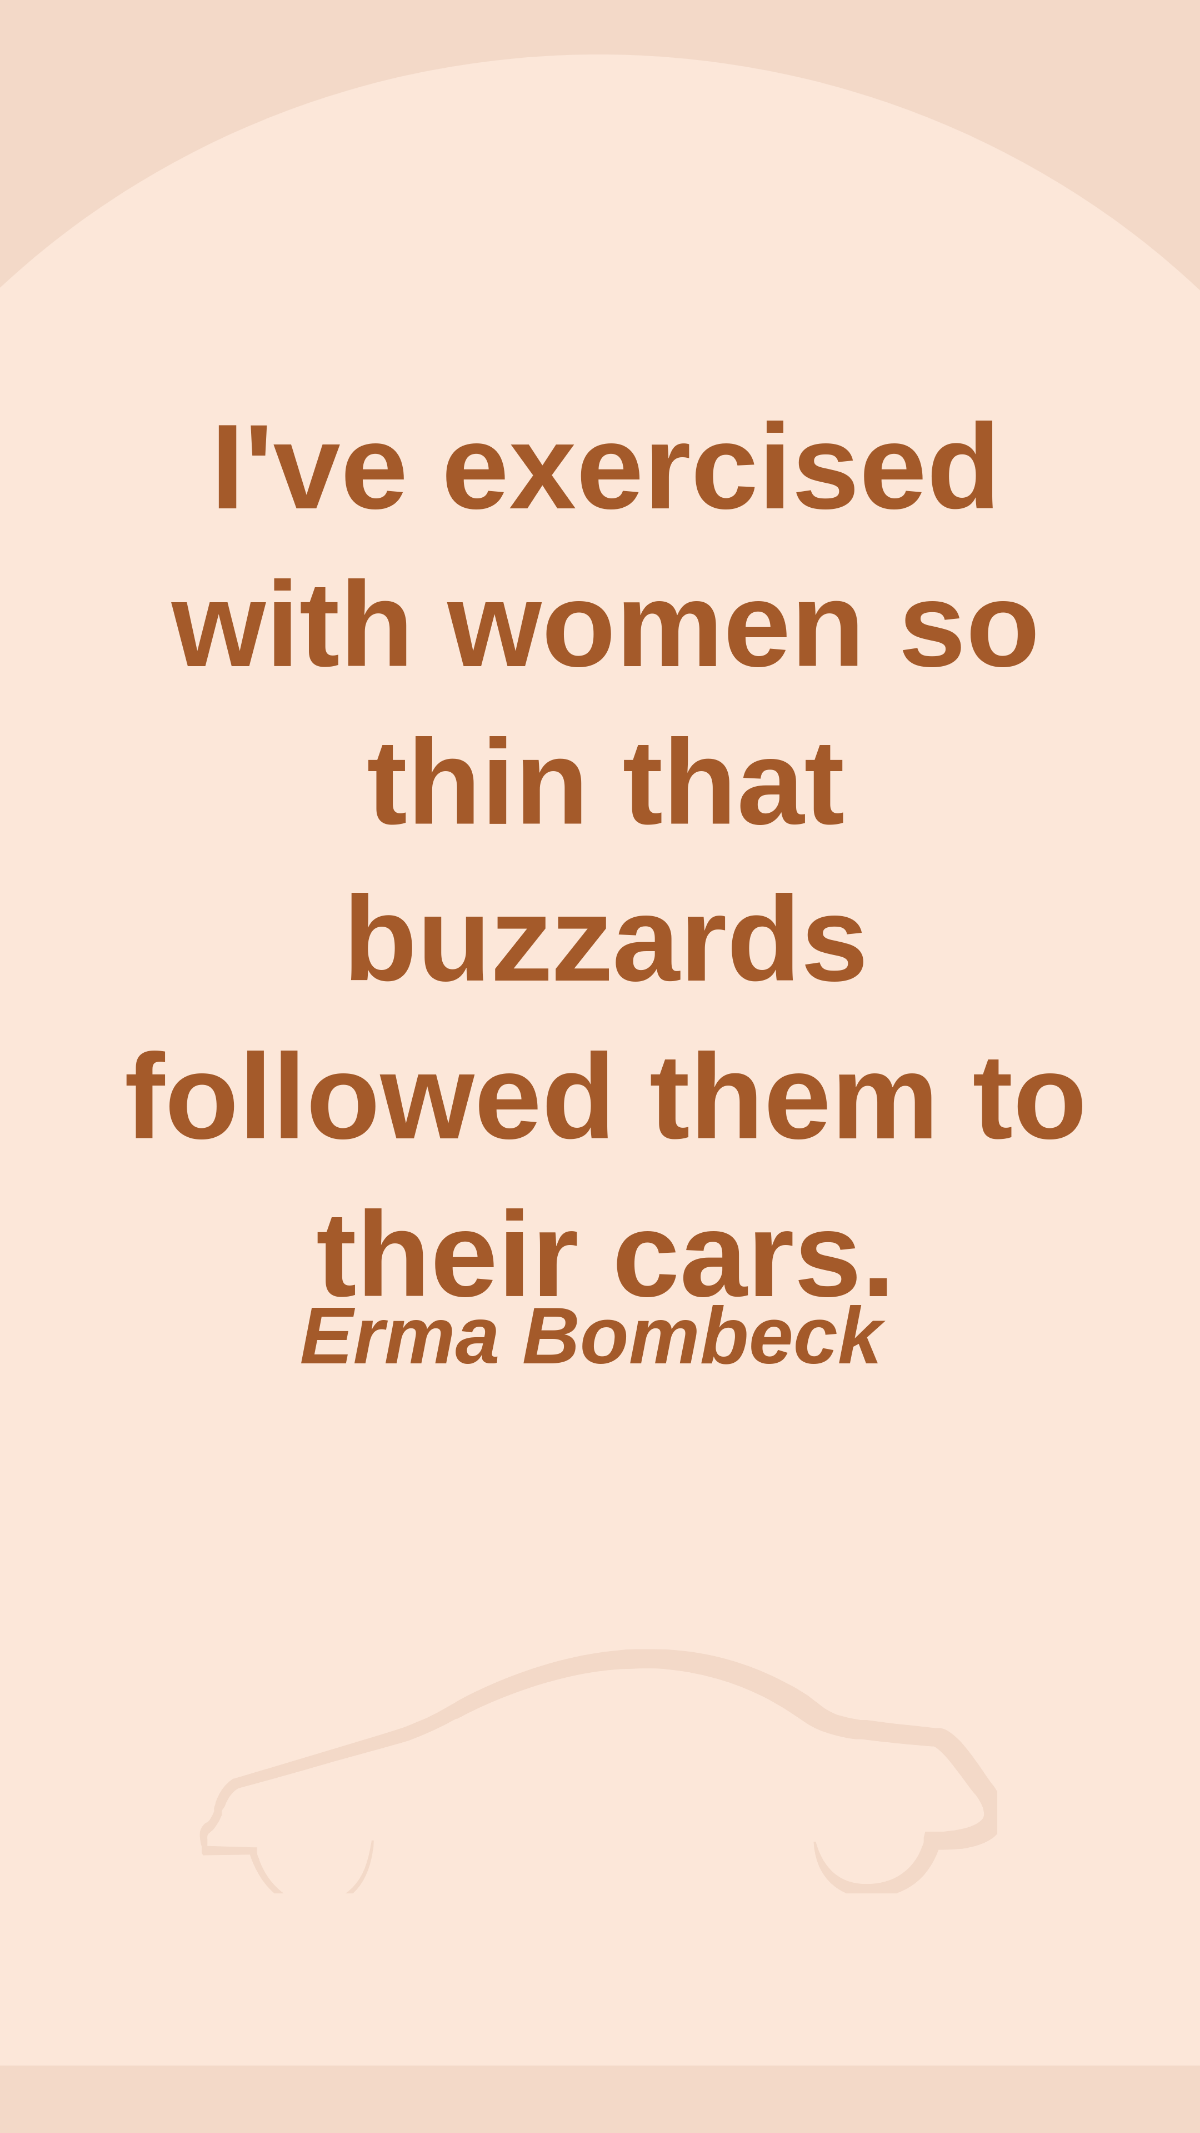 Free Erma Bombeck - I've exercised with women so thin that buzzards followed them to their cars. Template